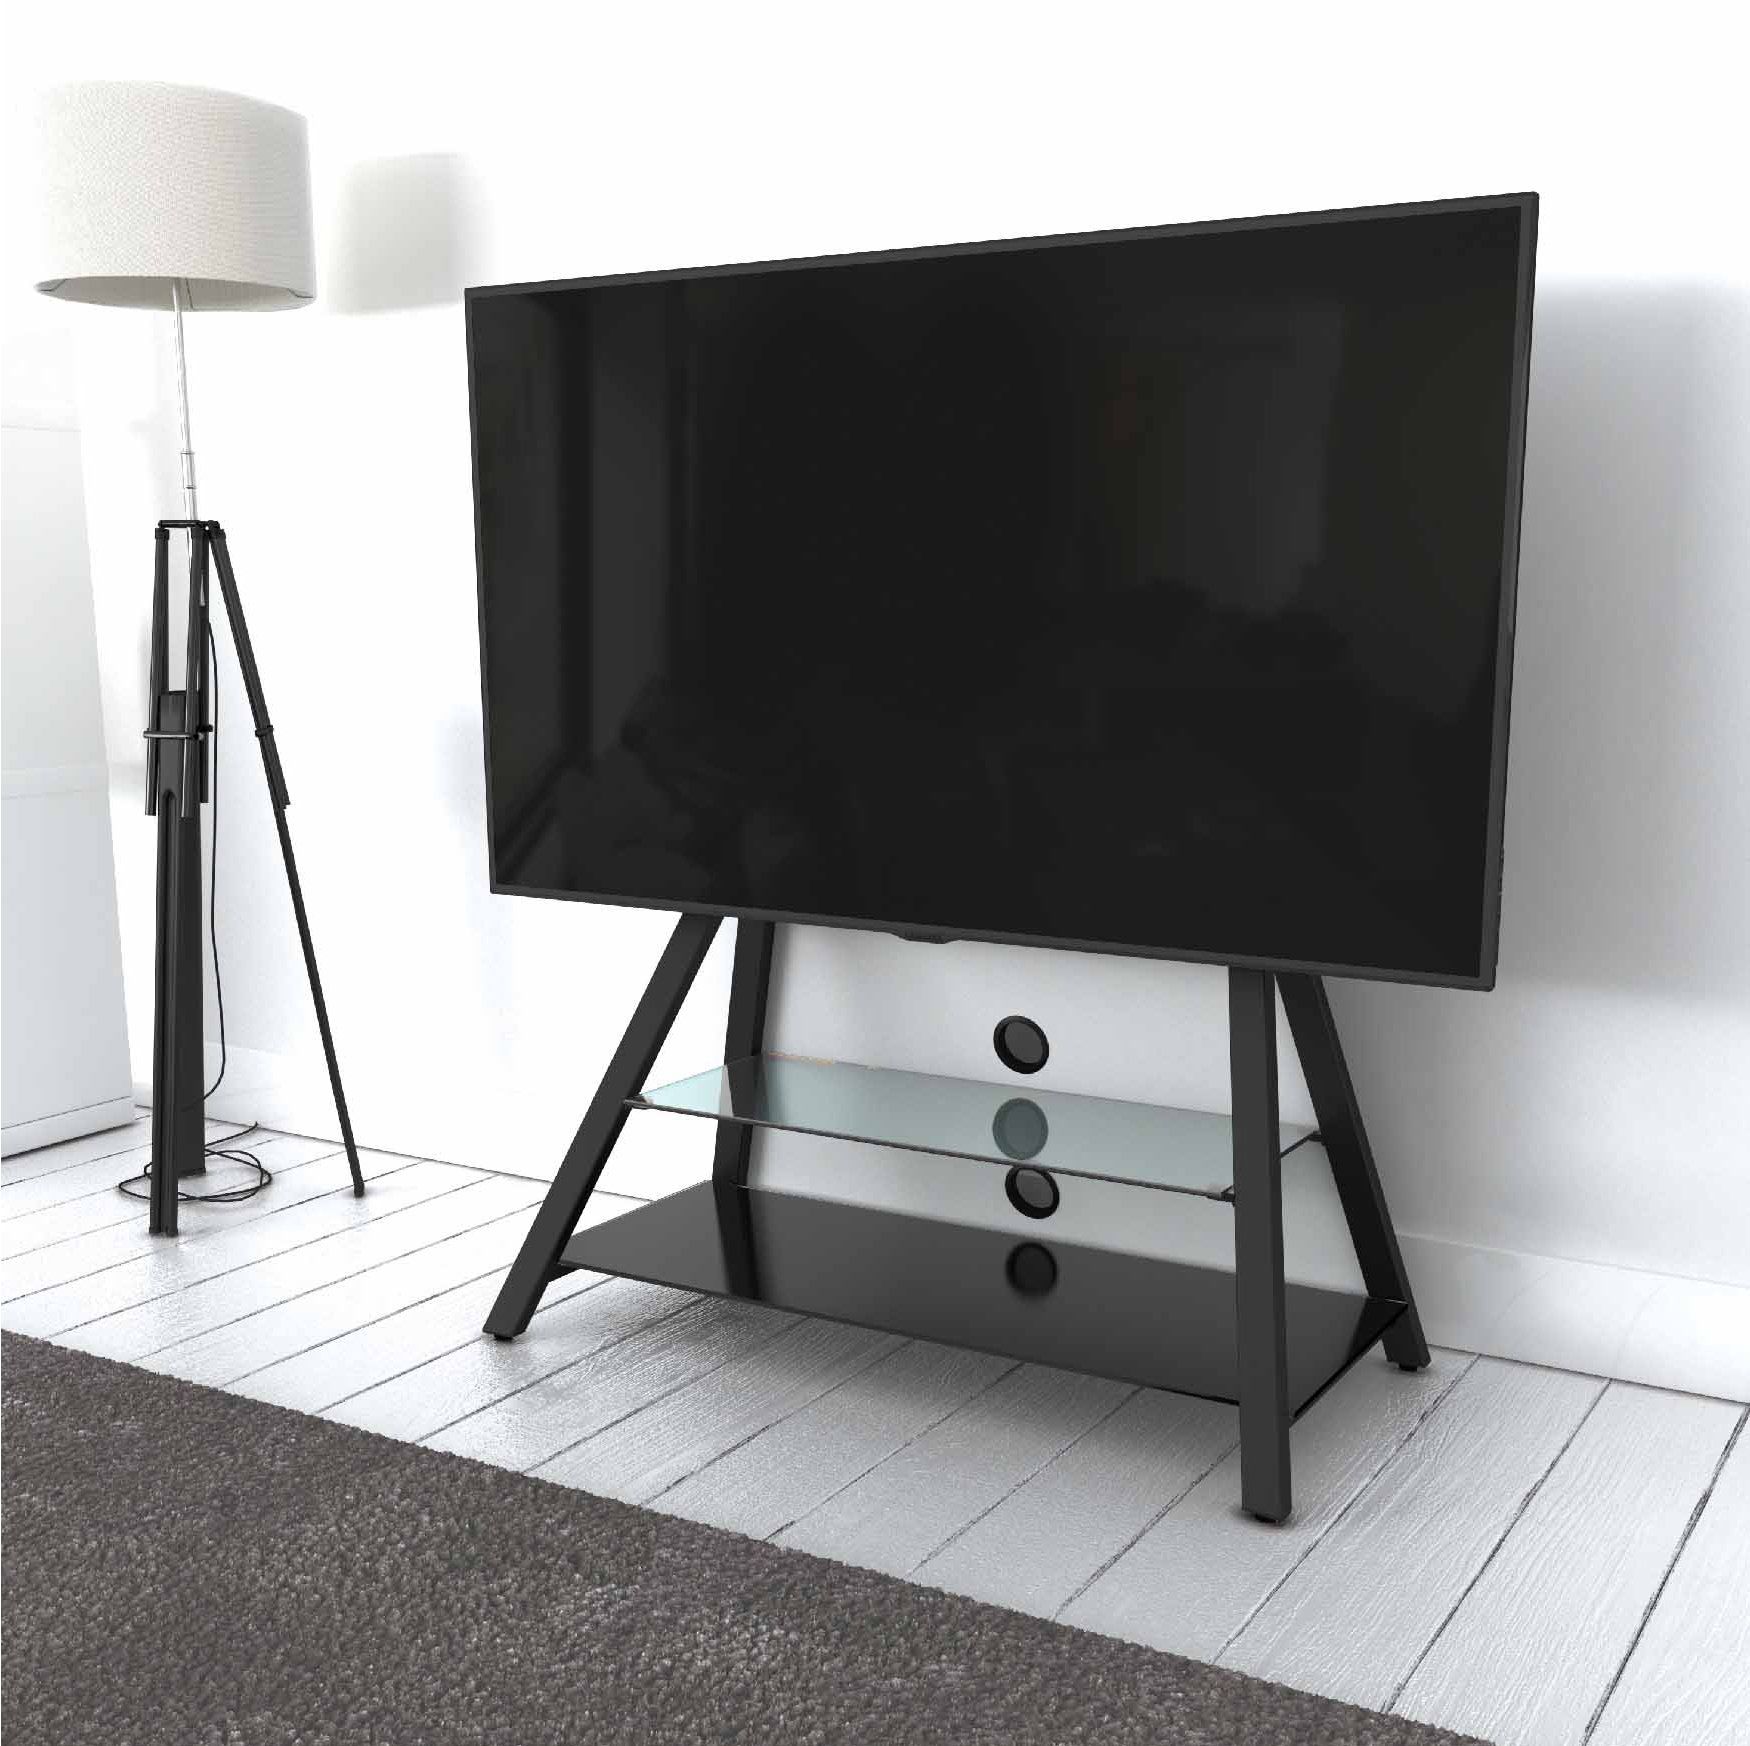 Avf Options Easl925a Easel Cantilever Tv Stand For Up To For Cantilever Tv (View 12 of 15)